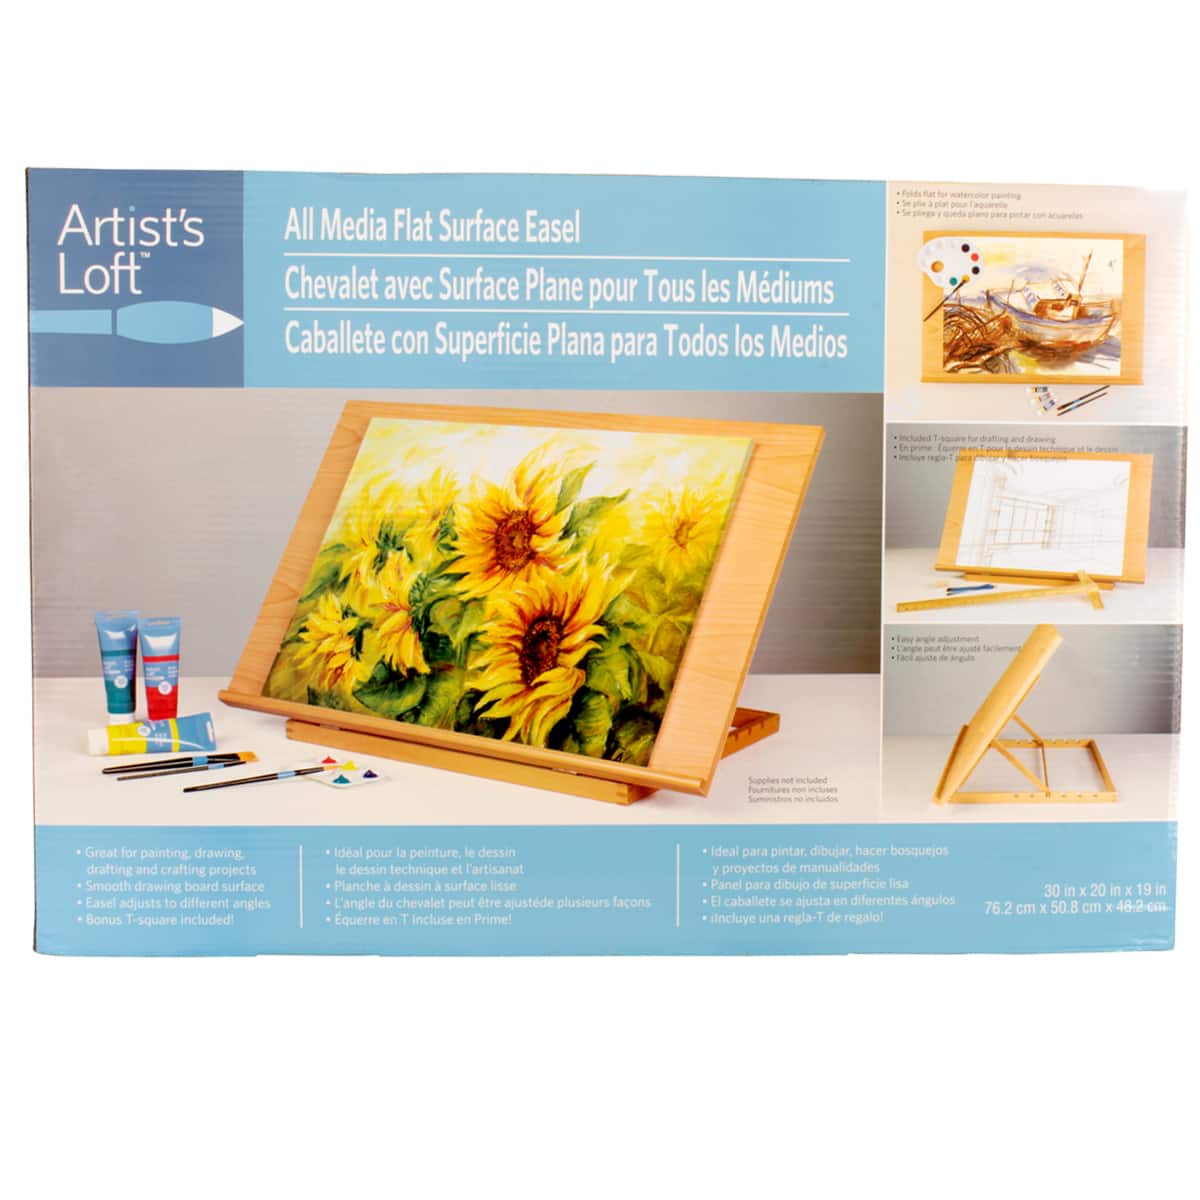 Watercolor Book Vol. 2 - Large 8x8 — Tiny Easel